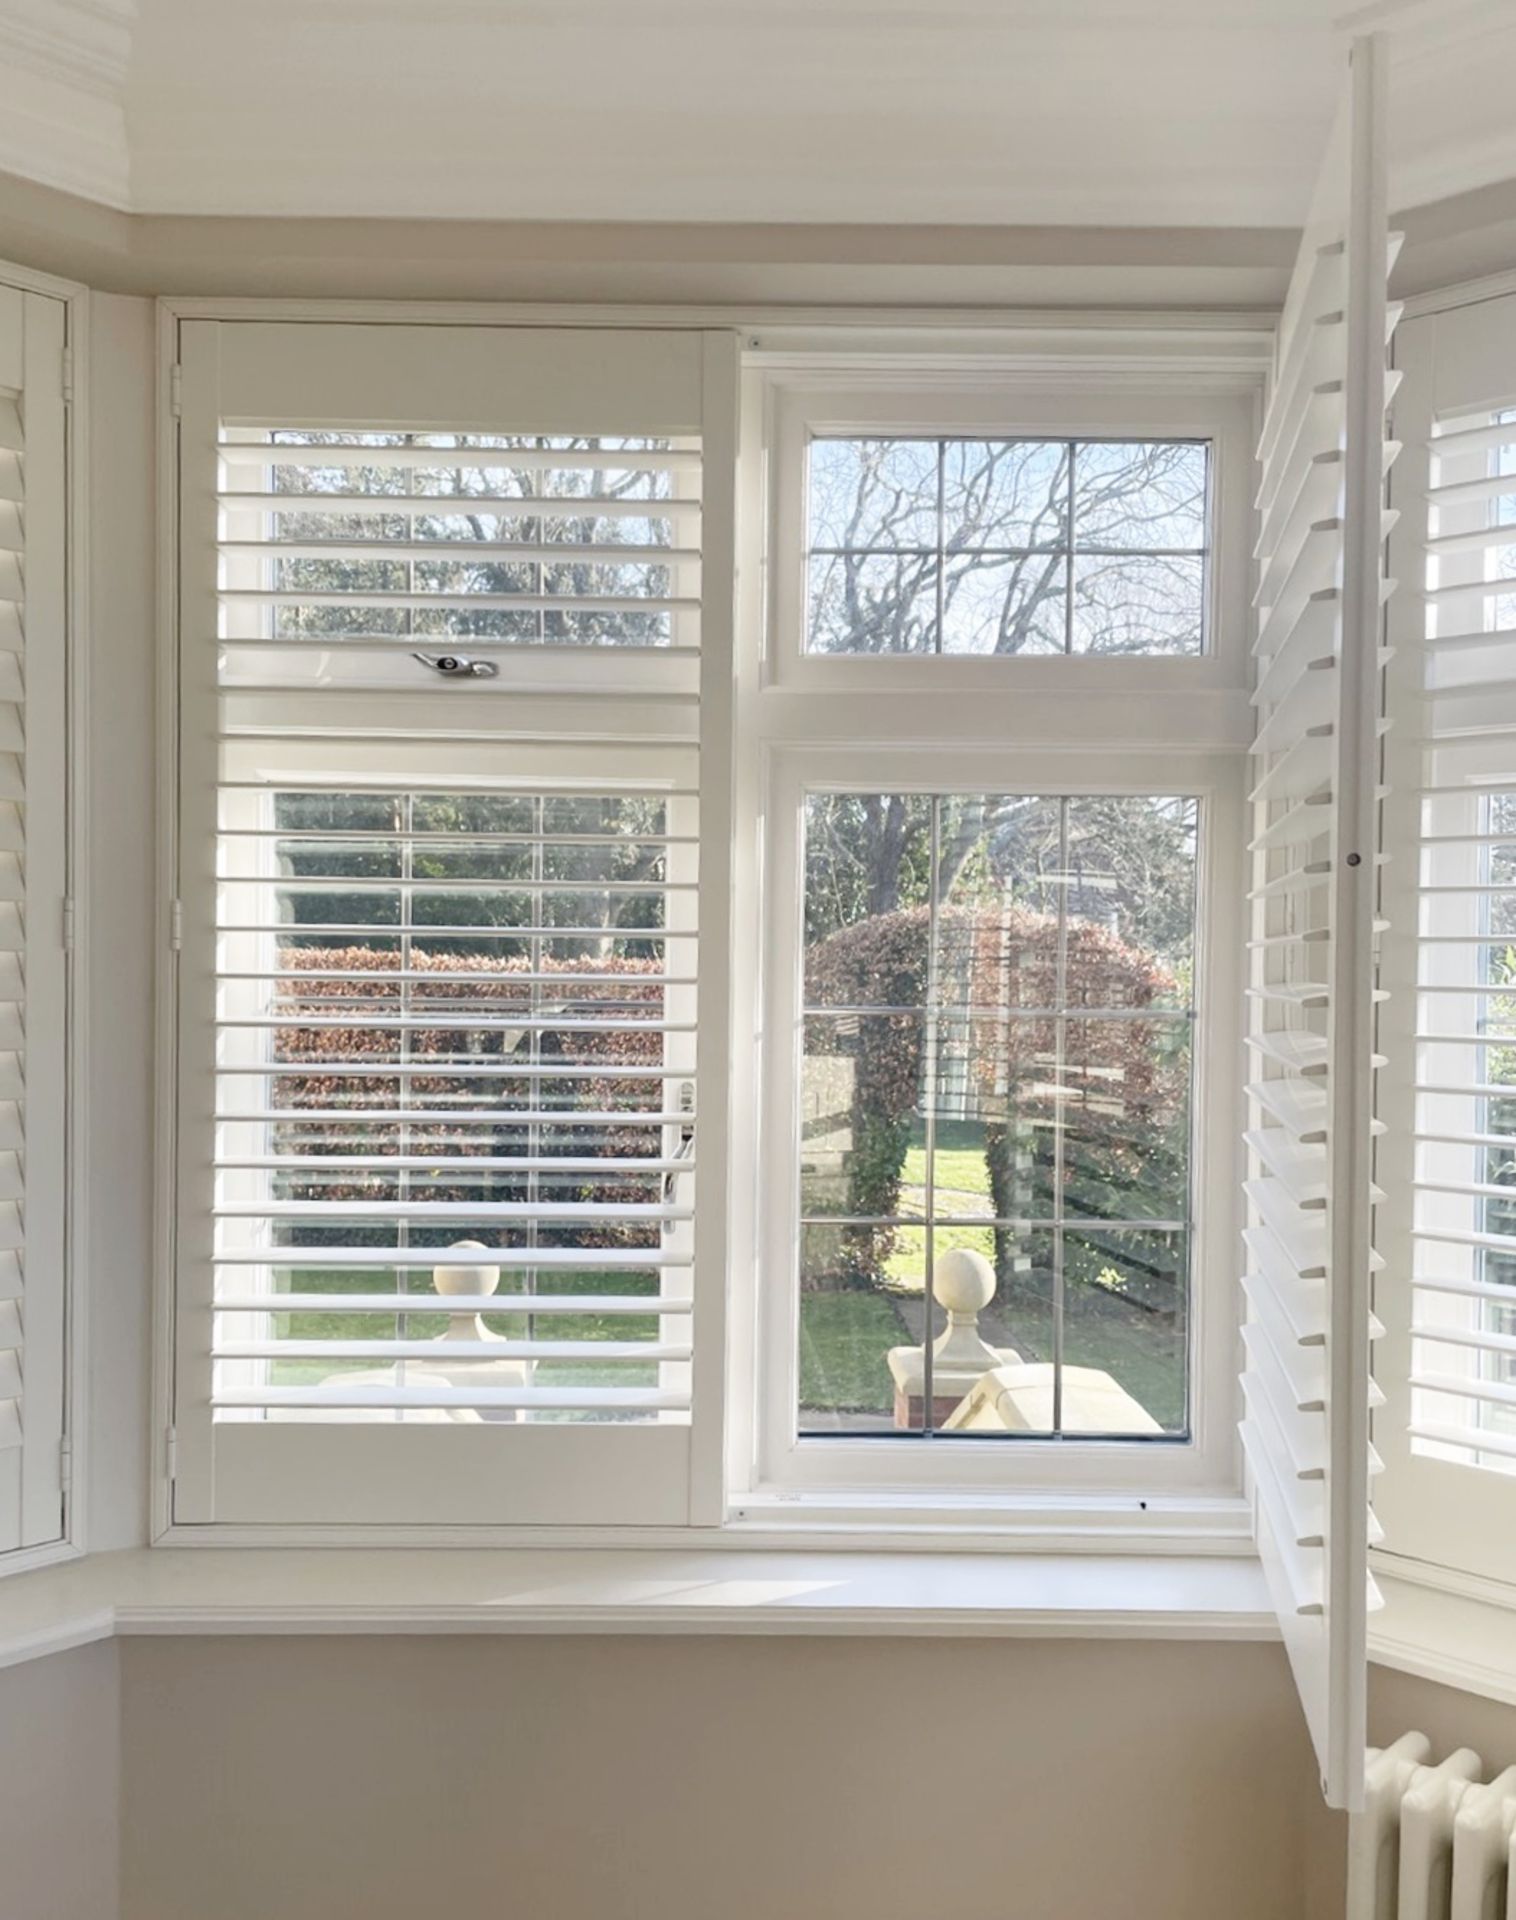 1 x Hardwood Timber Double Glazed Window Frames fitted with Shutter Blinds, In White - Ref: PAN101 - Image 2 of 23